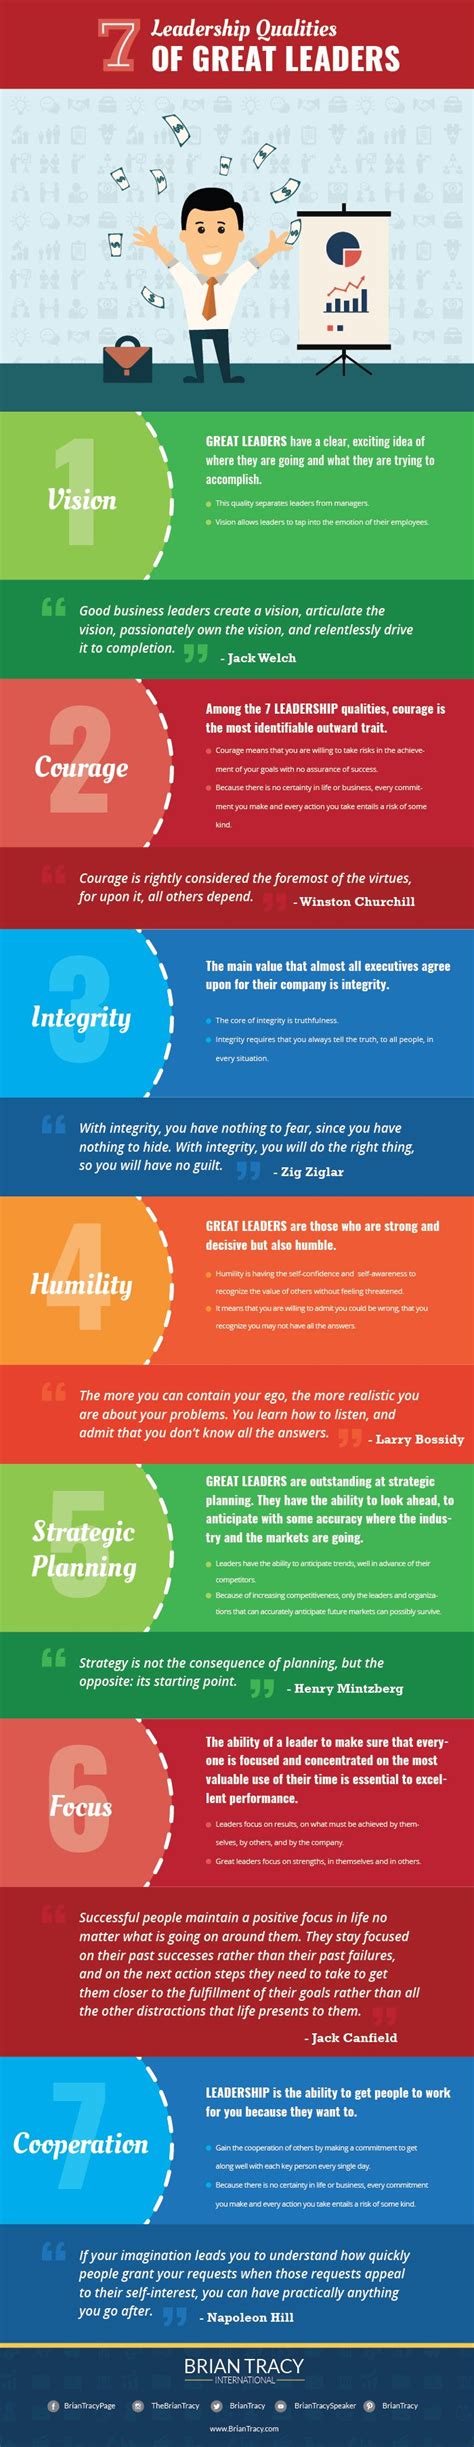 What Is The Good Leadership 22 Qualities That Make A Great Leader